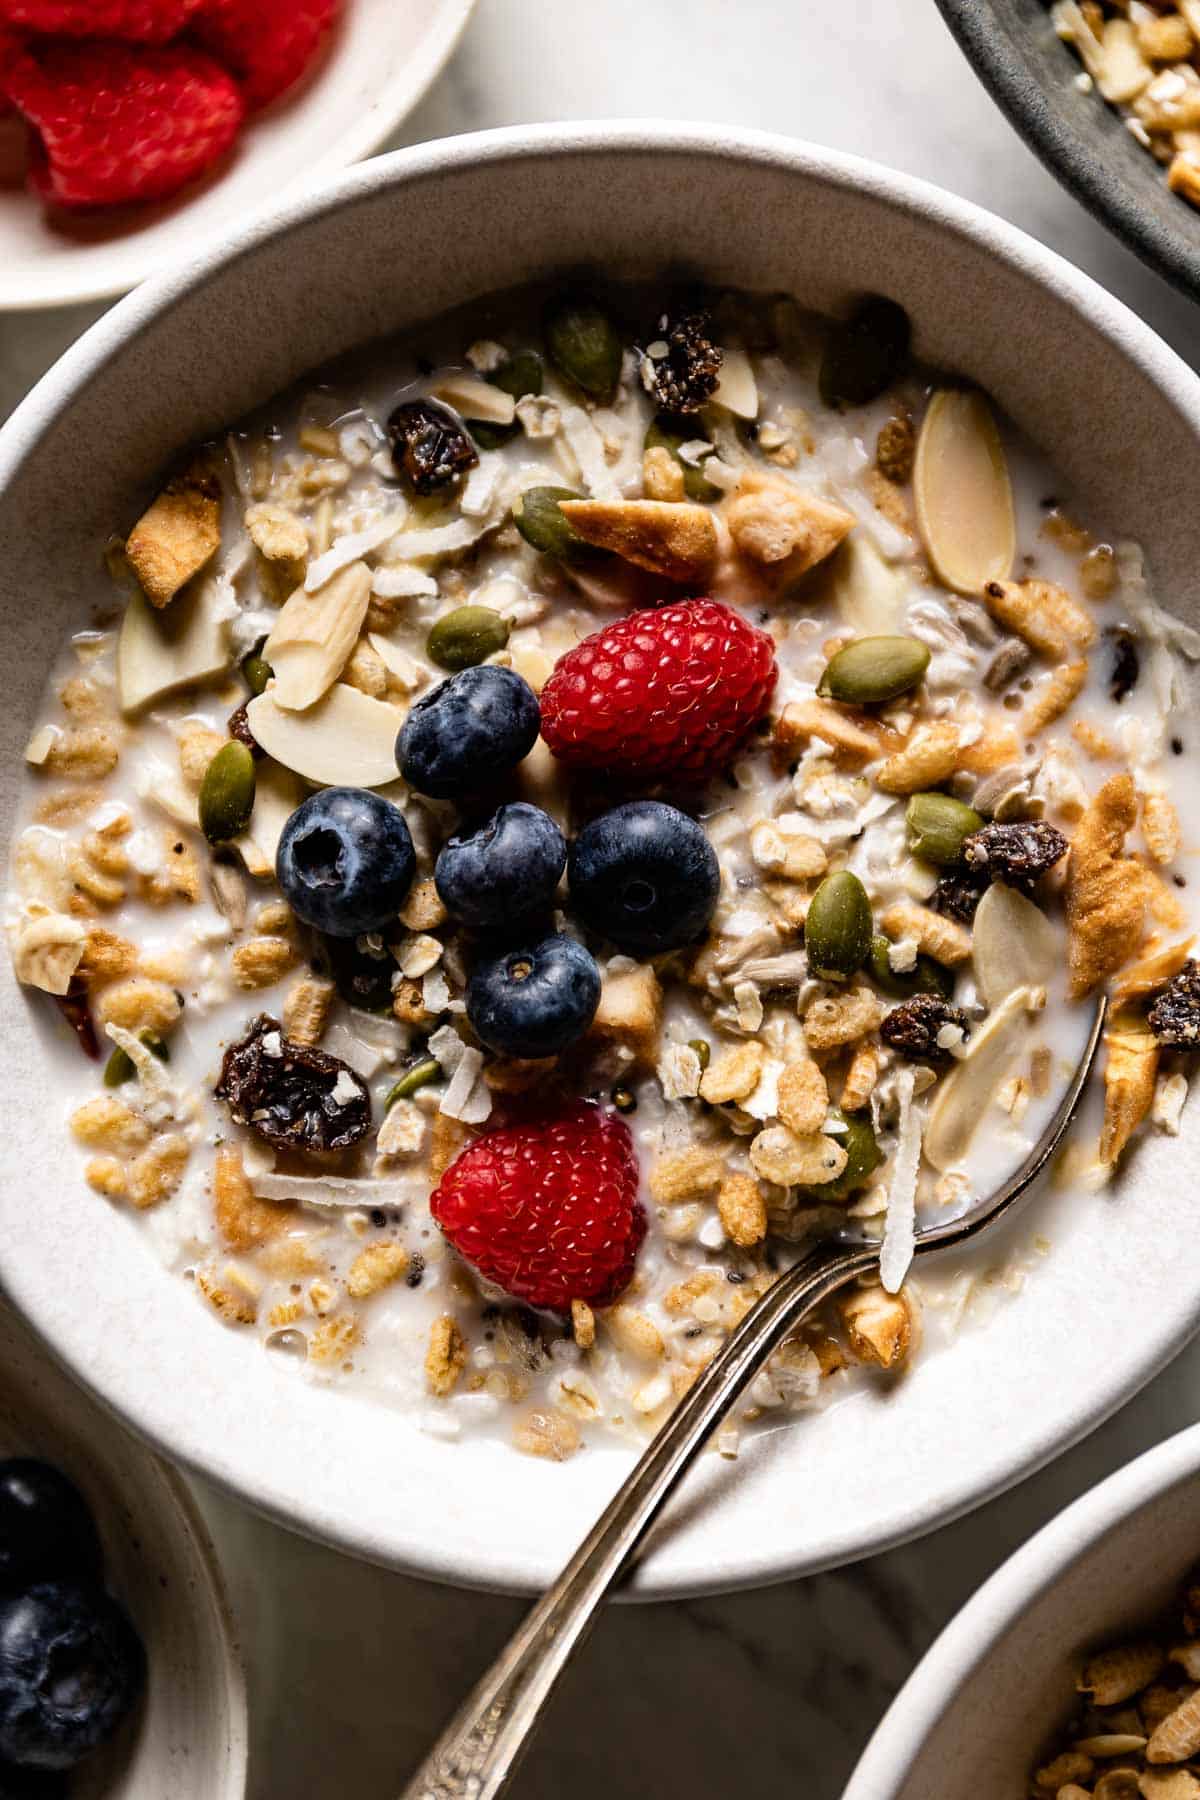 Fruit muesli in a bowl with milk and a spoon from the top view.